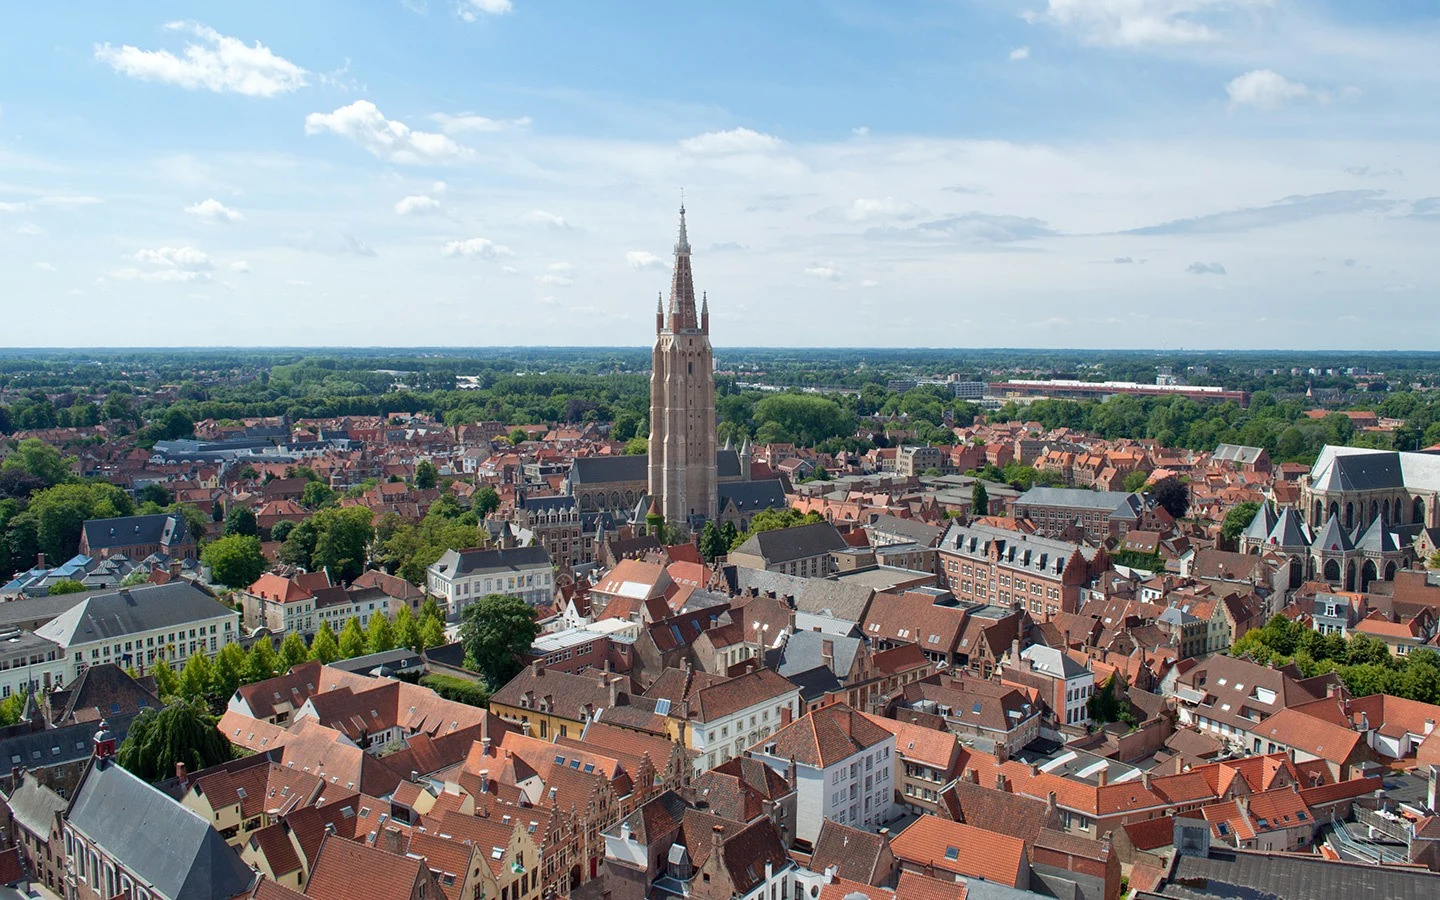 The Church of Our Lady as seen from the top of the Belfort tower in Bruges, Belgium